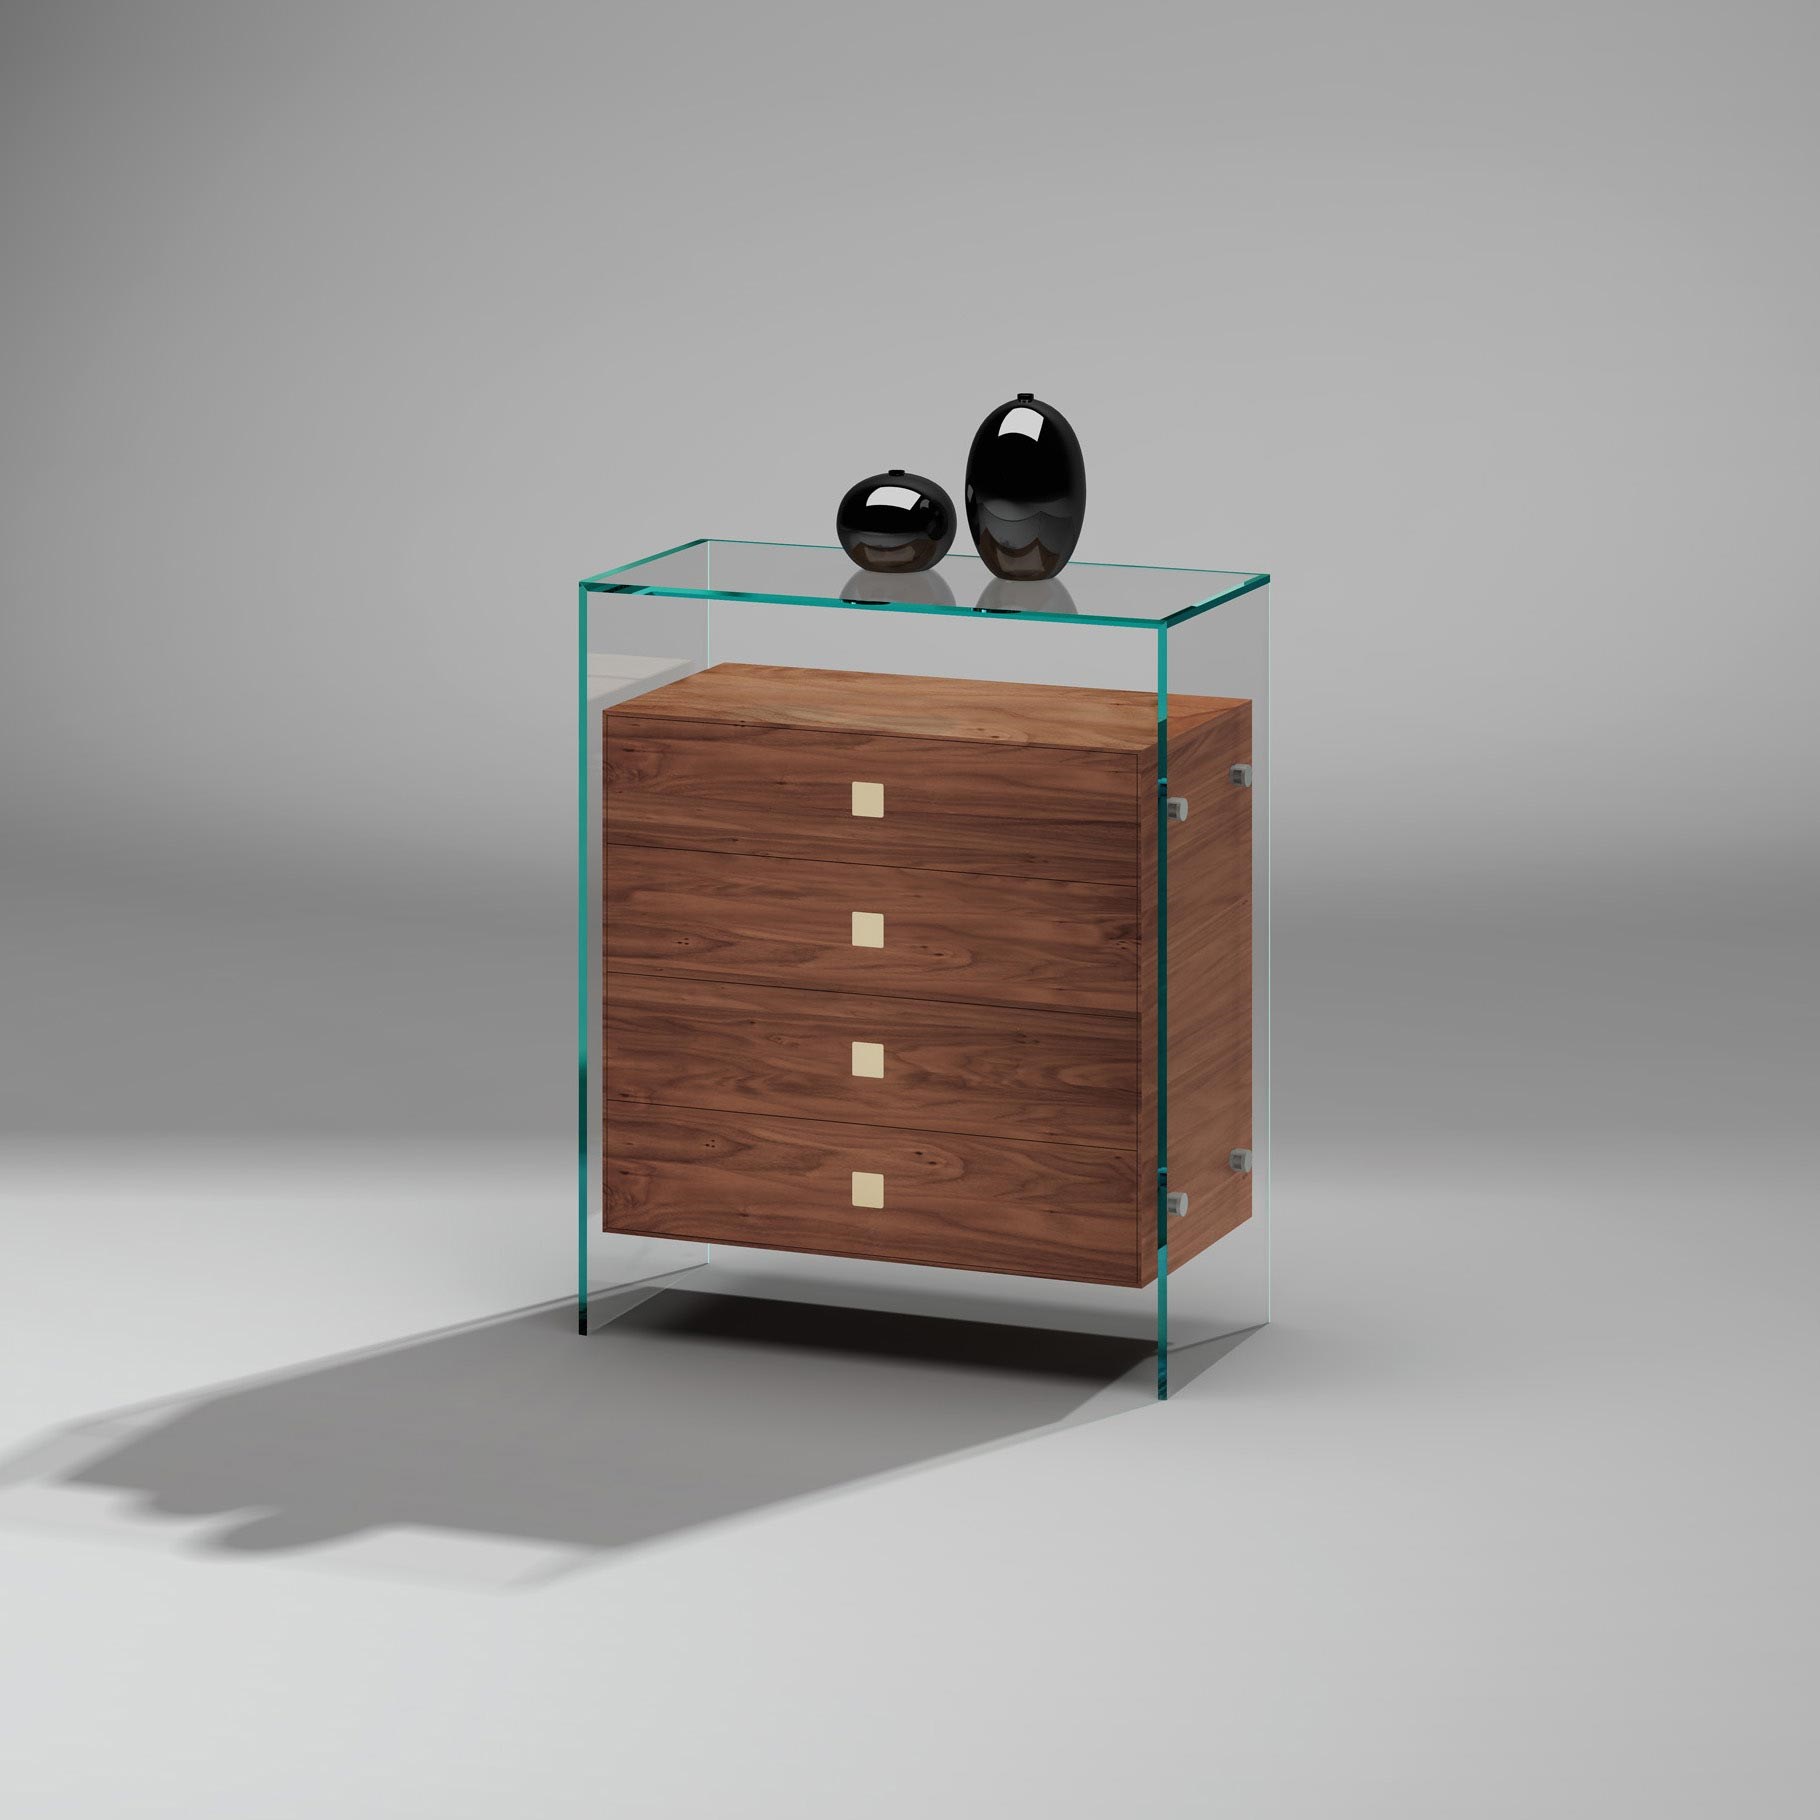 Solid wood commode FUSION wood 84 by DREIECK DESIGN: OPTIWHITE + solid wood walnut